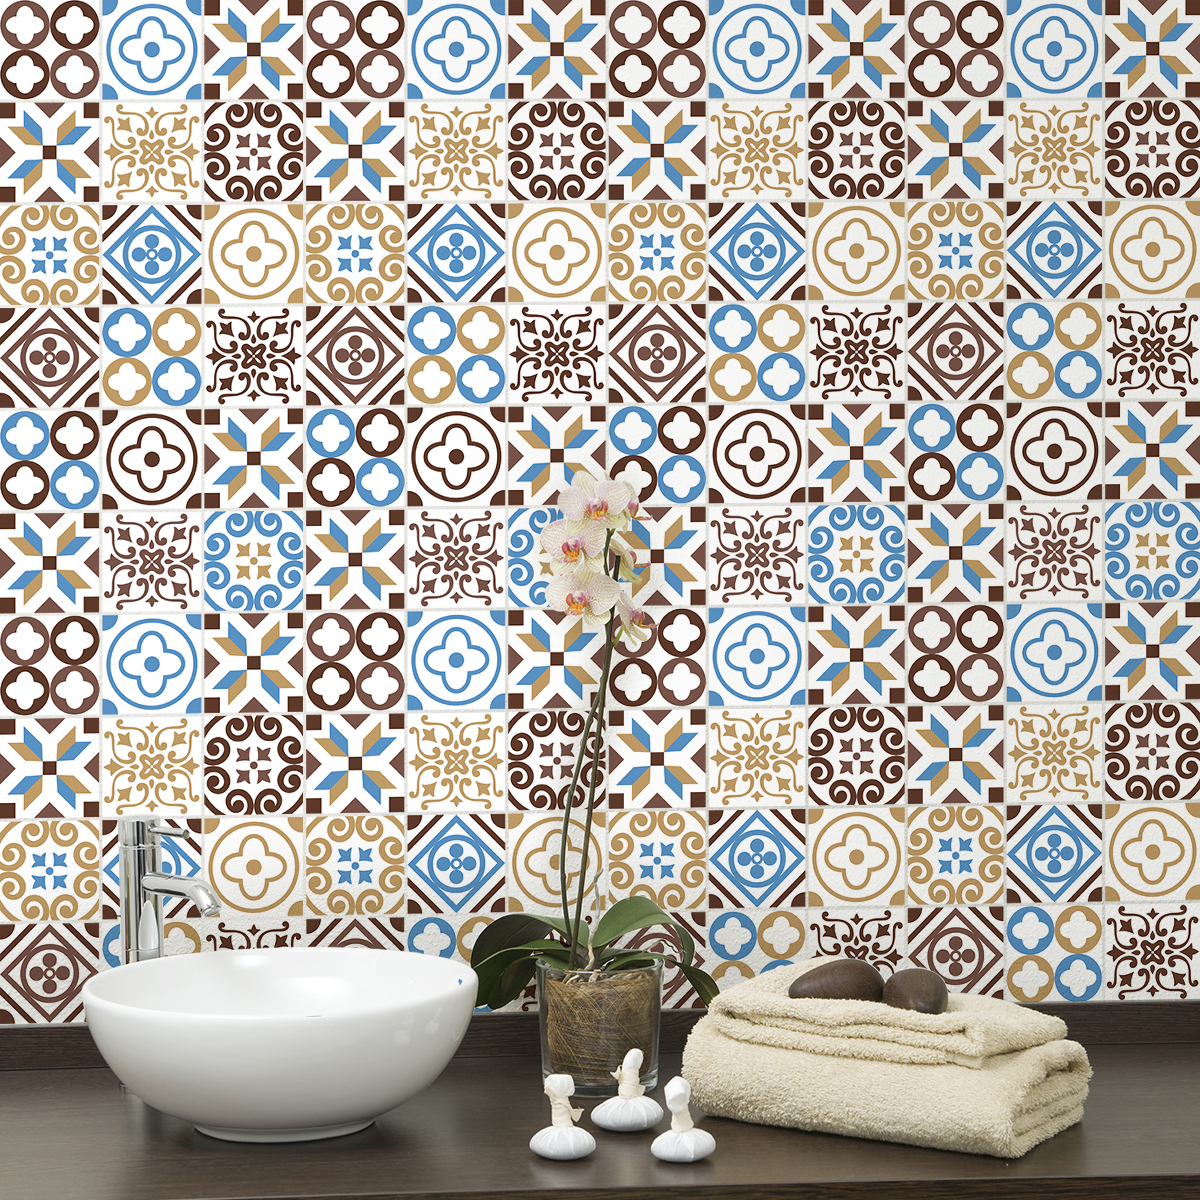 9 wall stickers cement tiles azulejos nevea